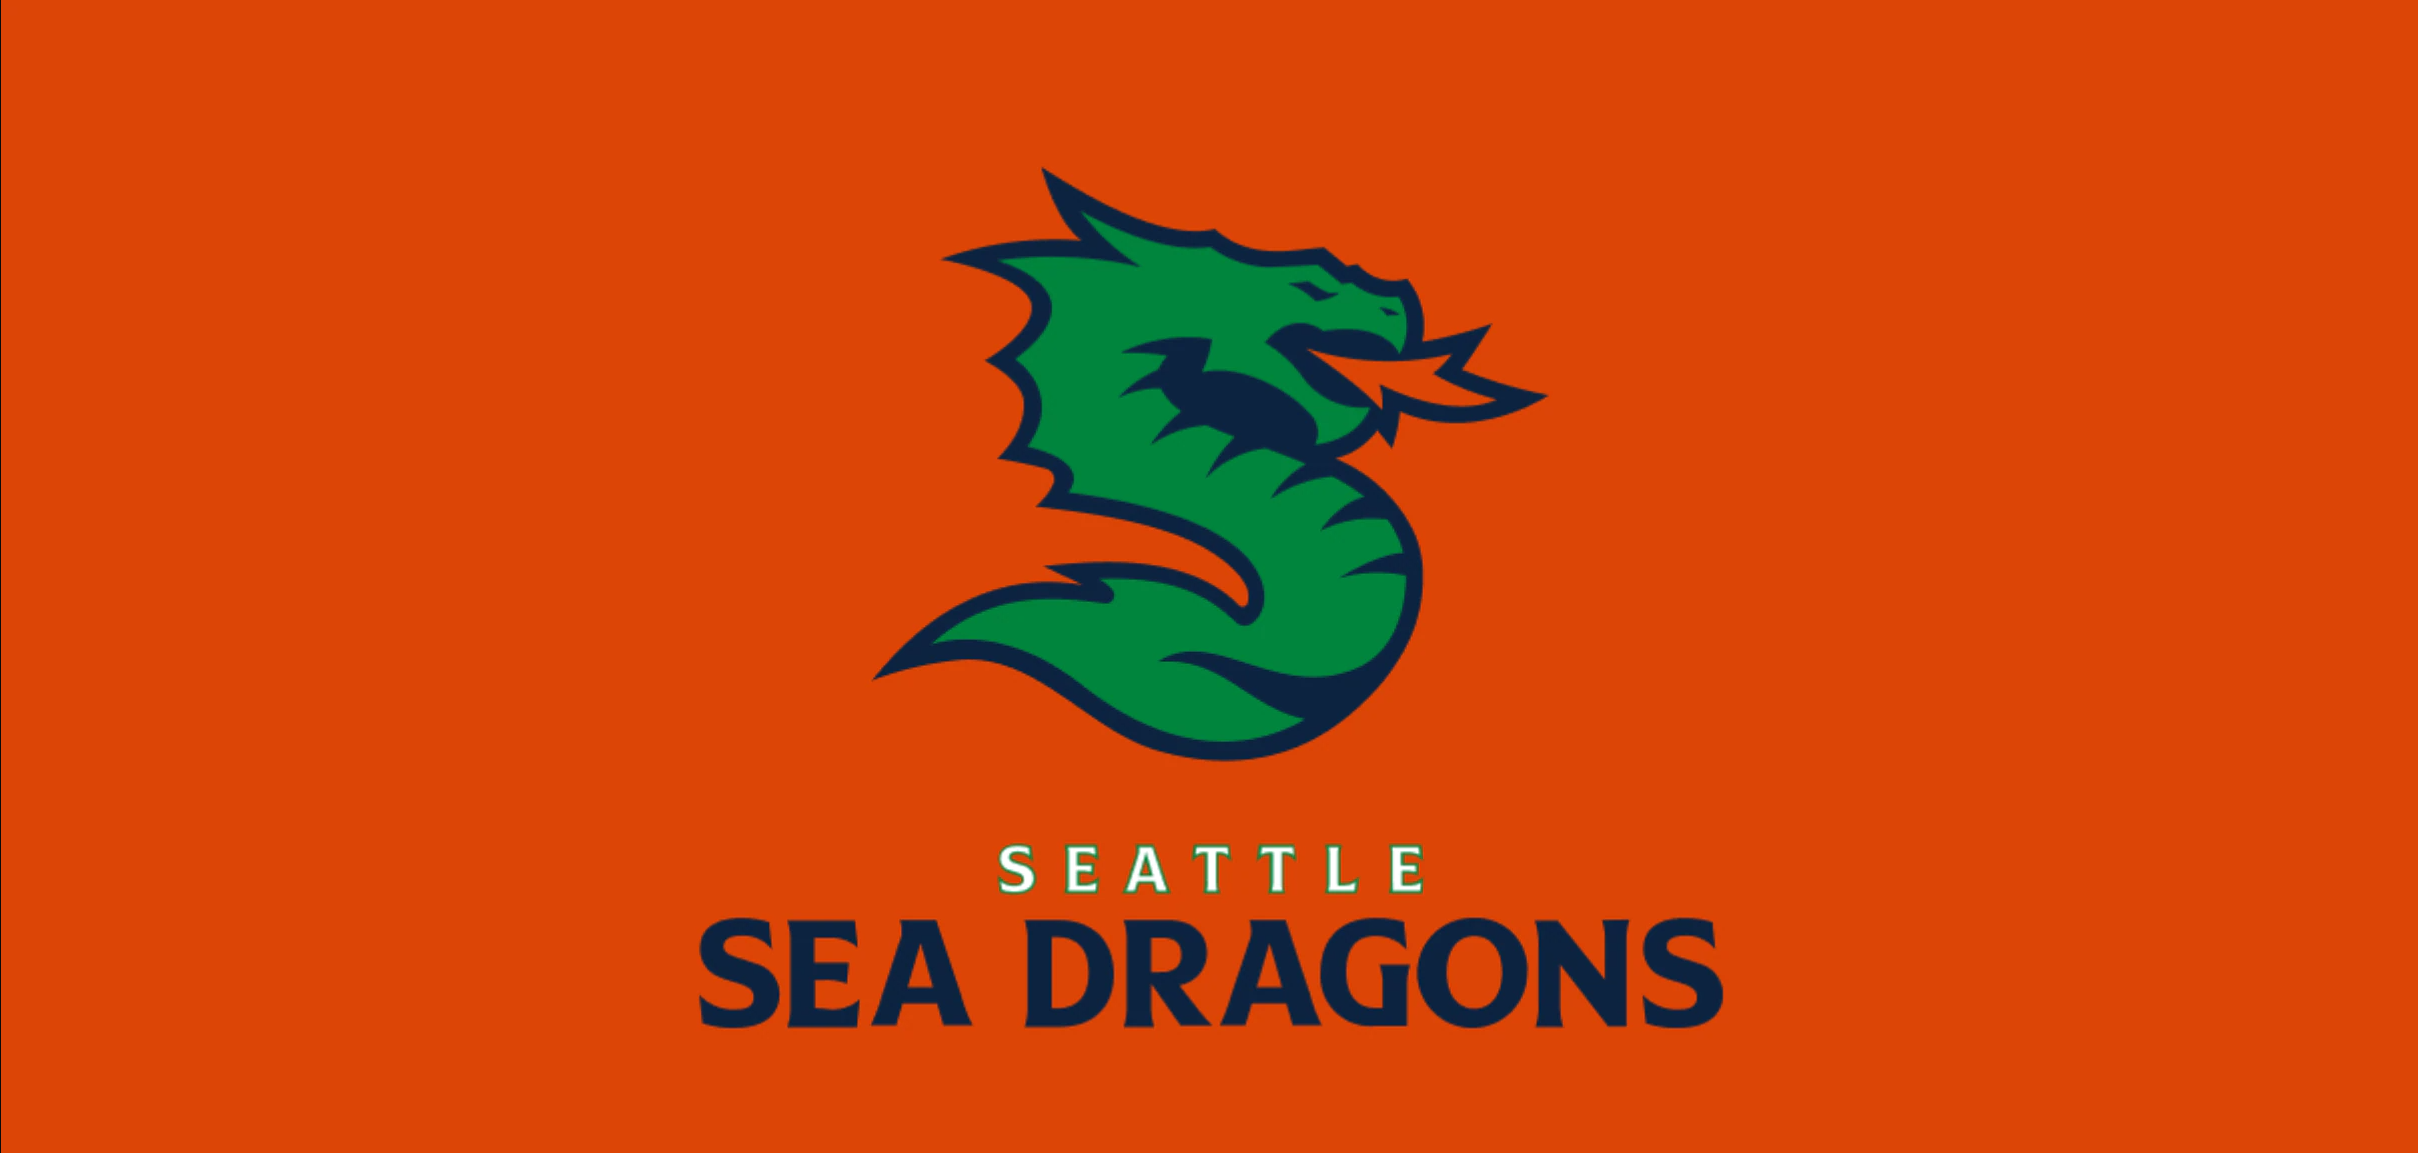 What to know about the Sea Dragons and the XFL